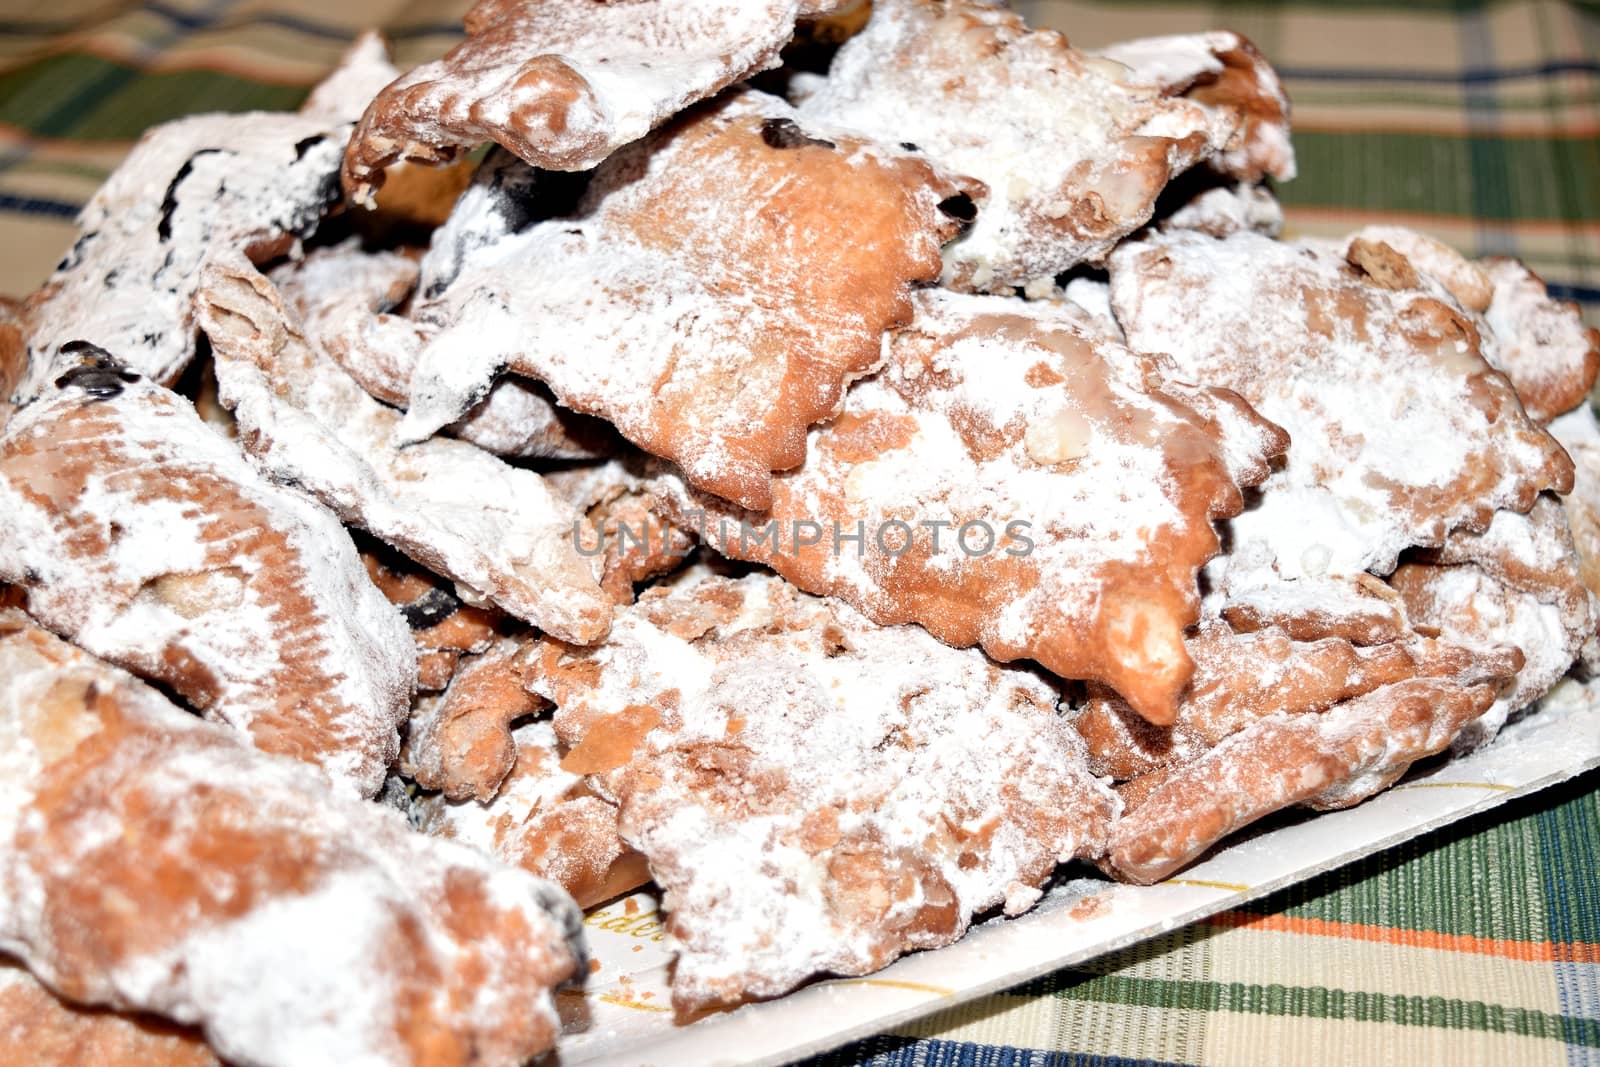 Ciacchiere are a typical Italian sweets usually prepared during the period of Carnival